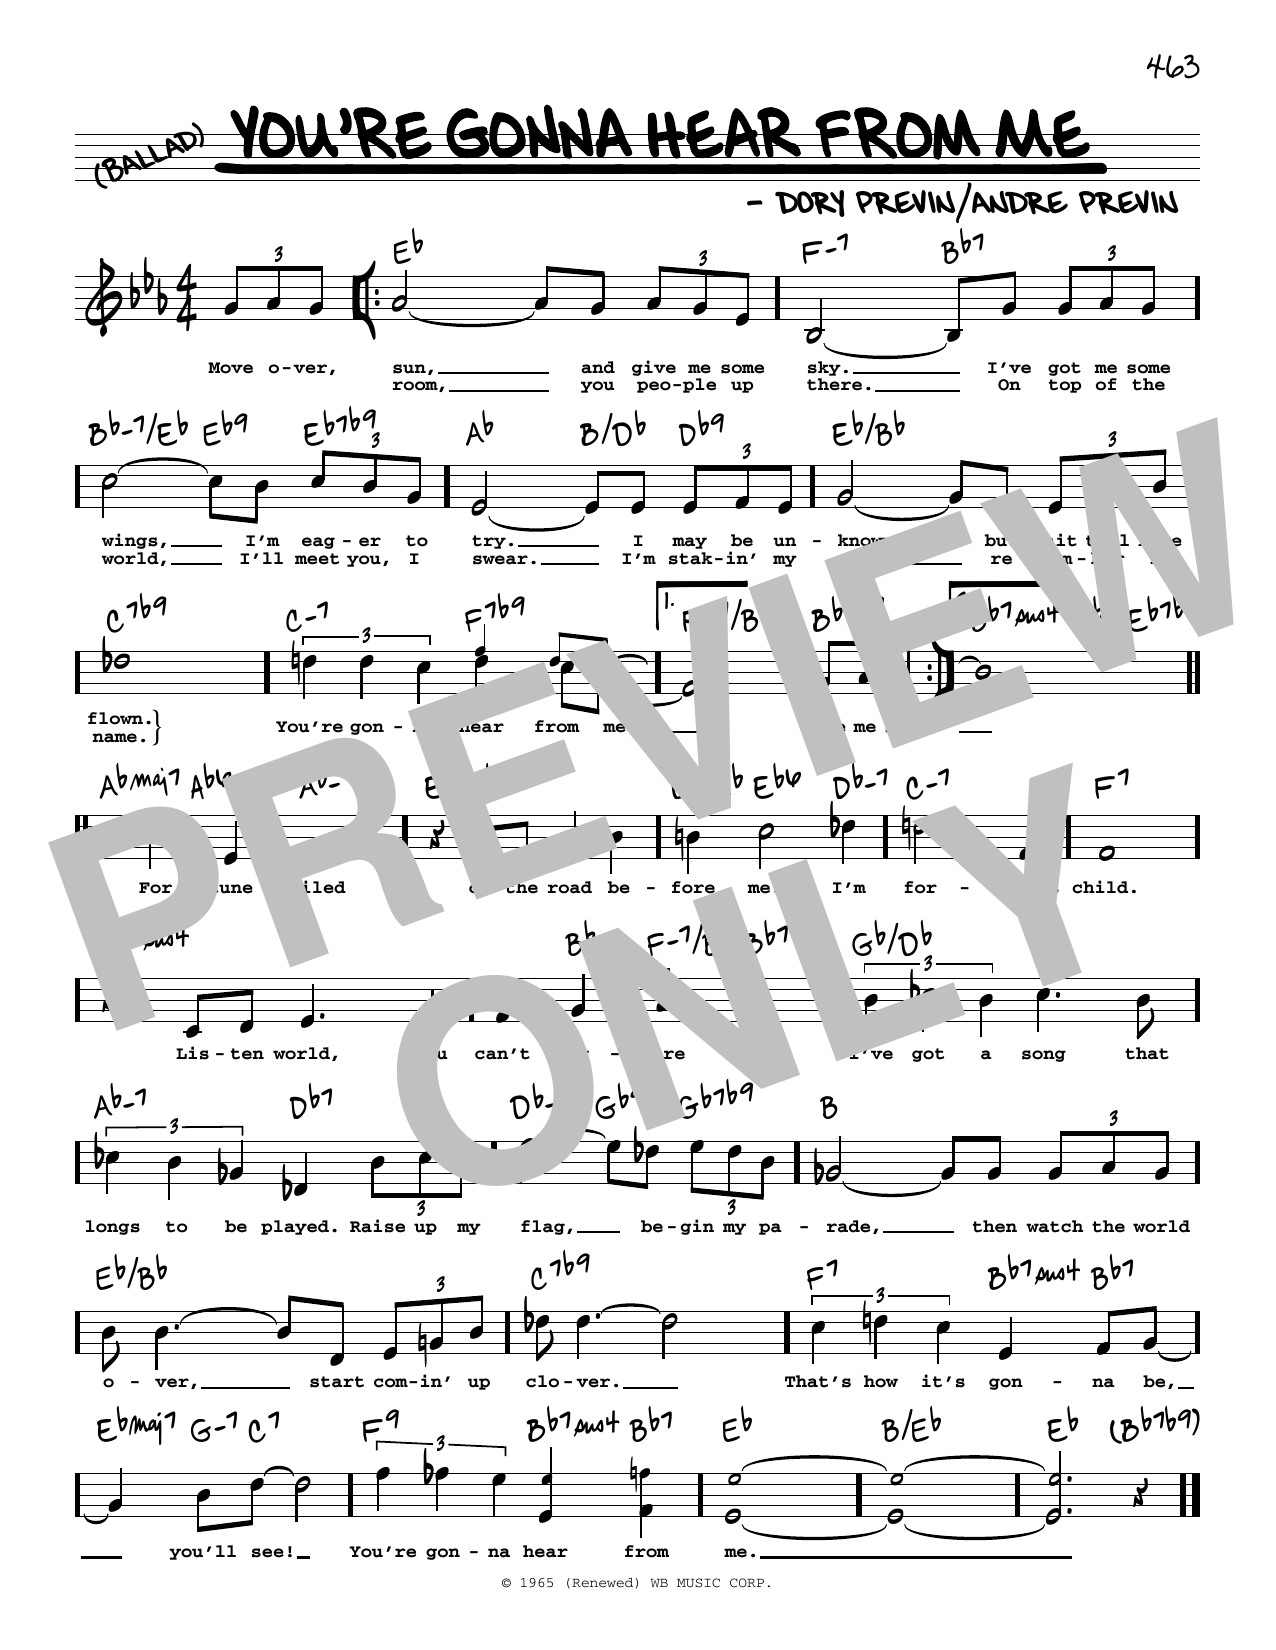 Download Barbra Streisand You're Gonna Hear From Me (High Voice) Sheet Music